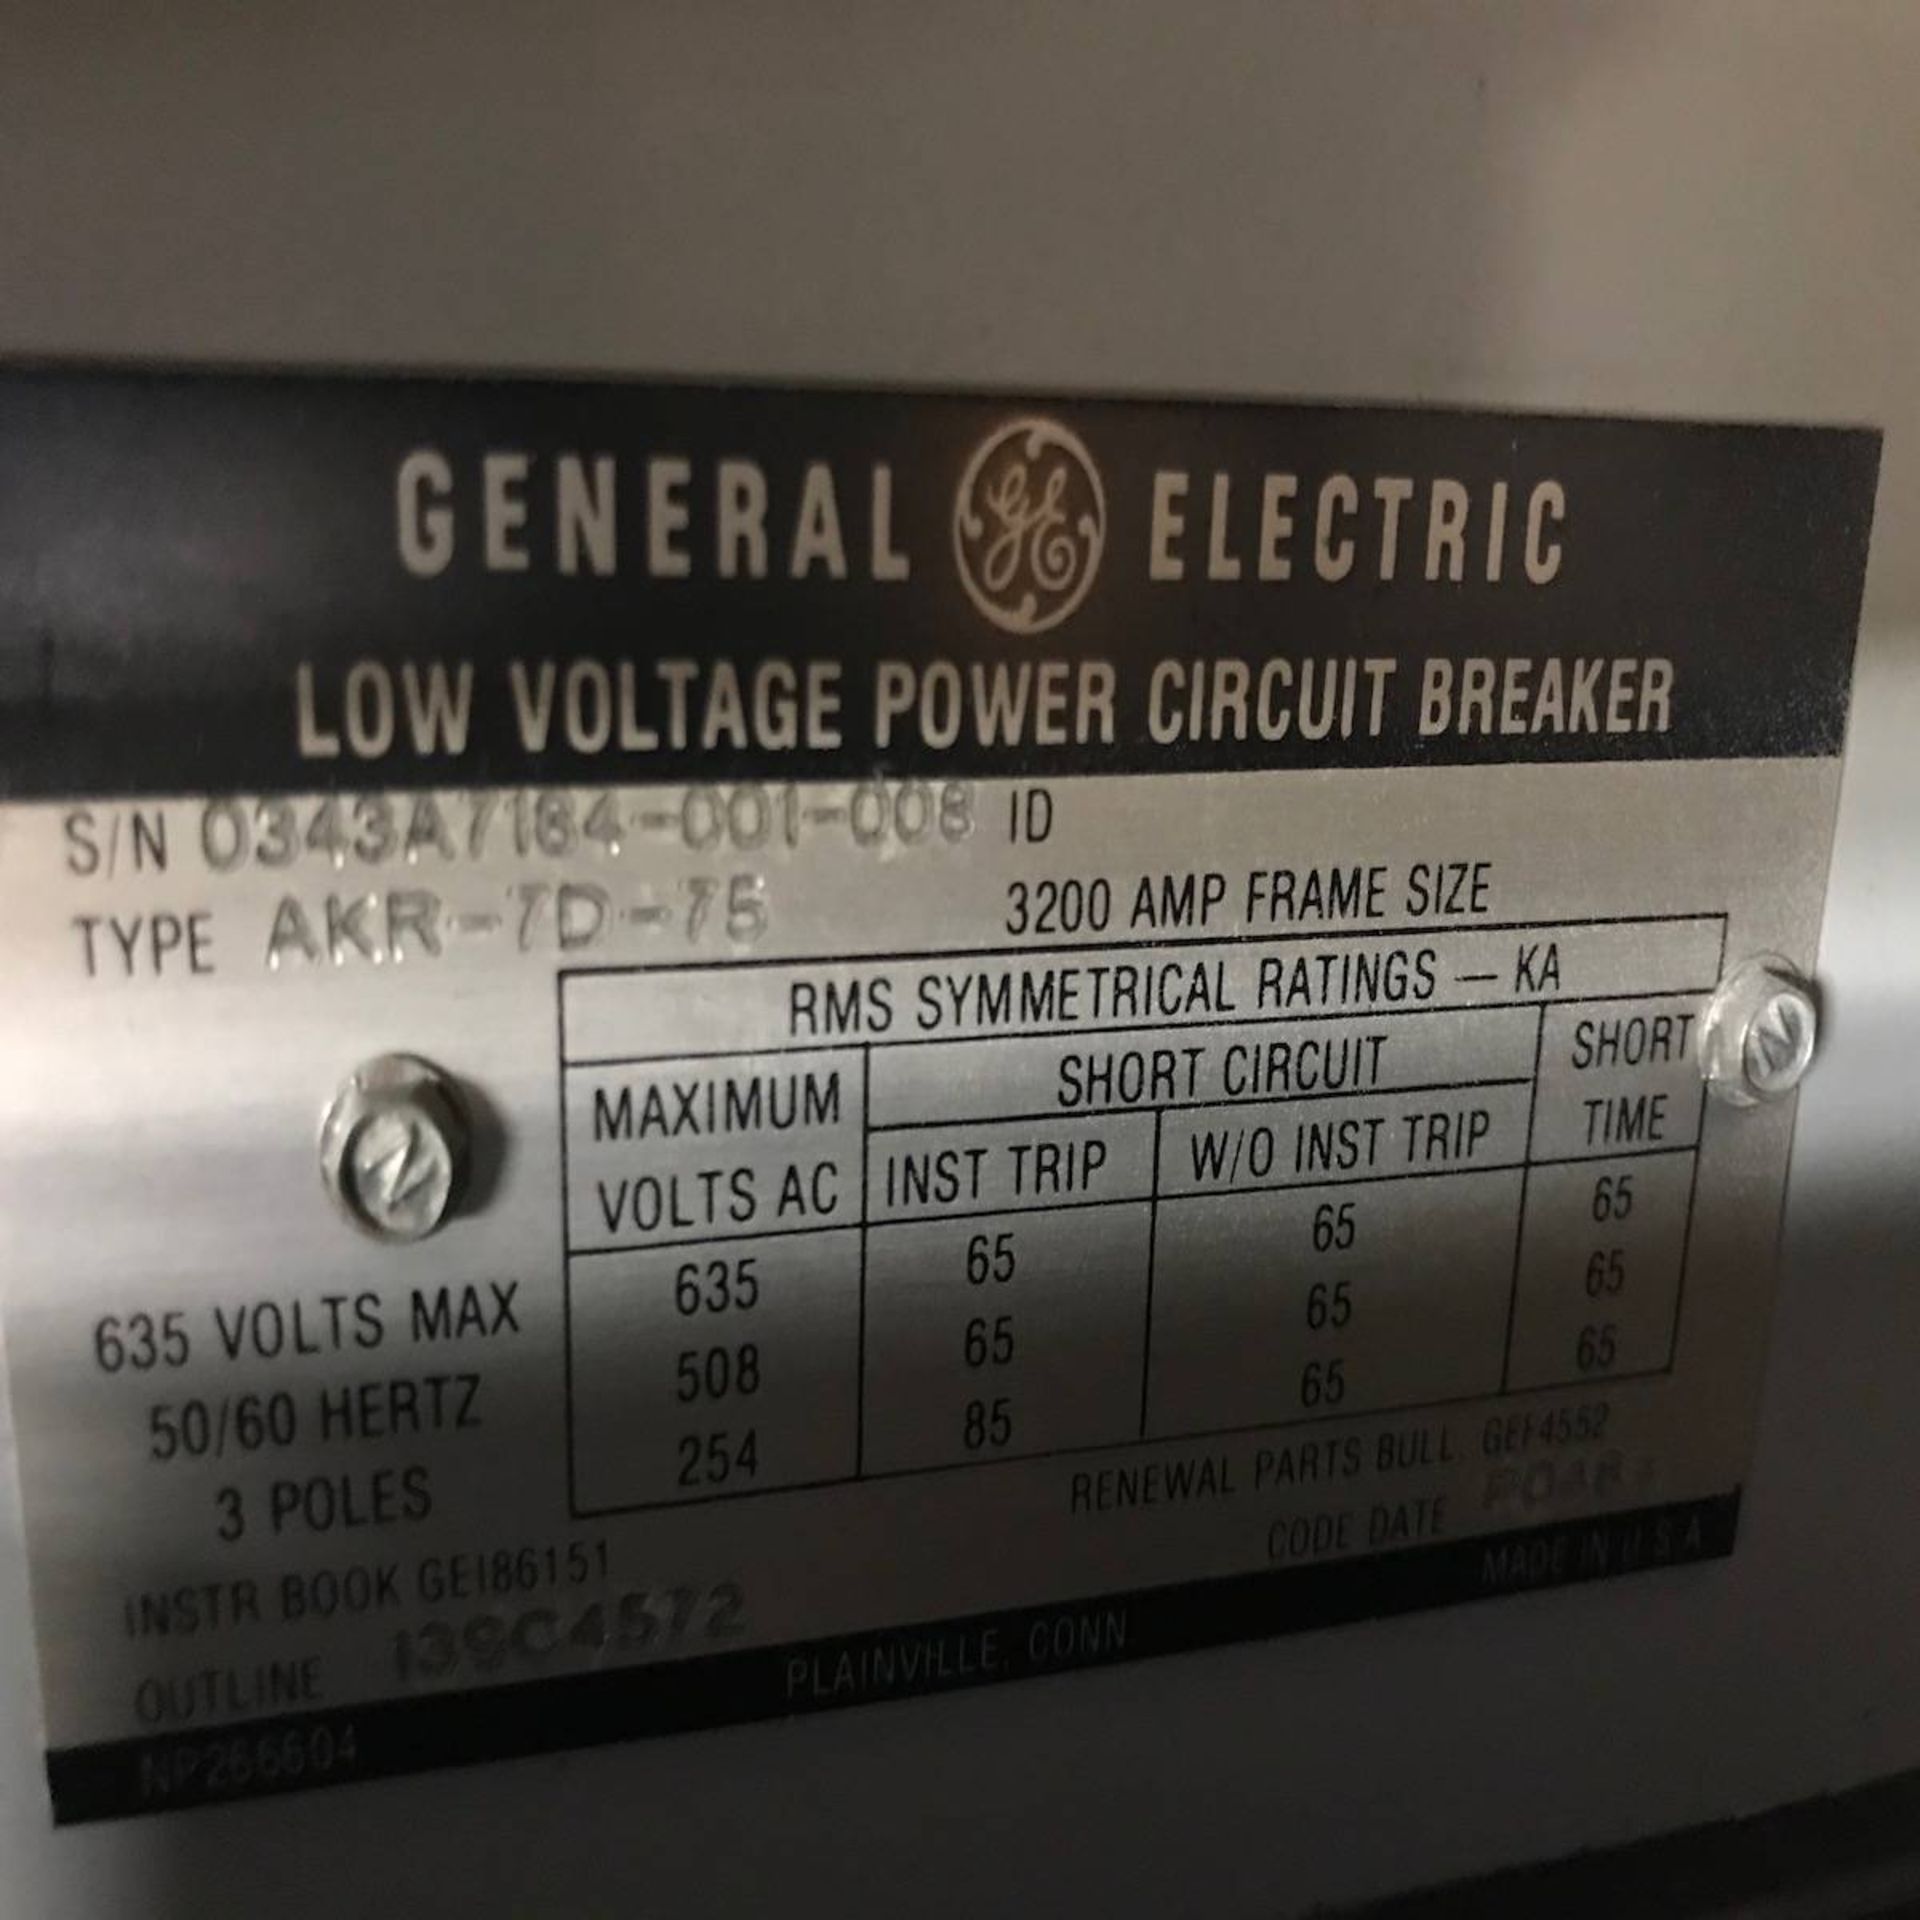 General Electric AKR-7D-75 Low Voltage Power Circuit Breaker - Image 3 of 3